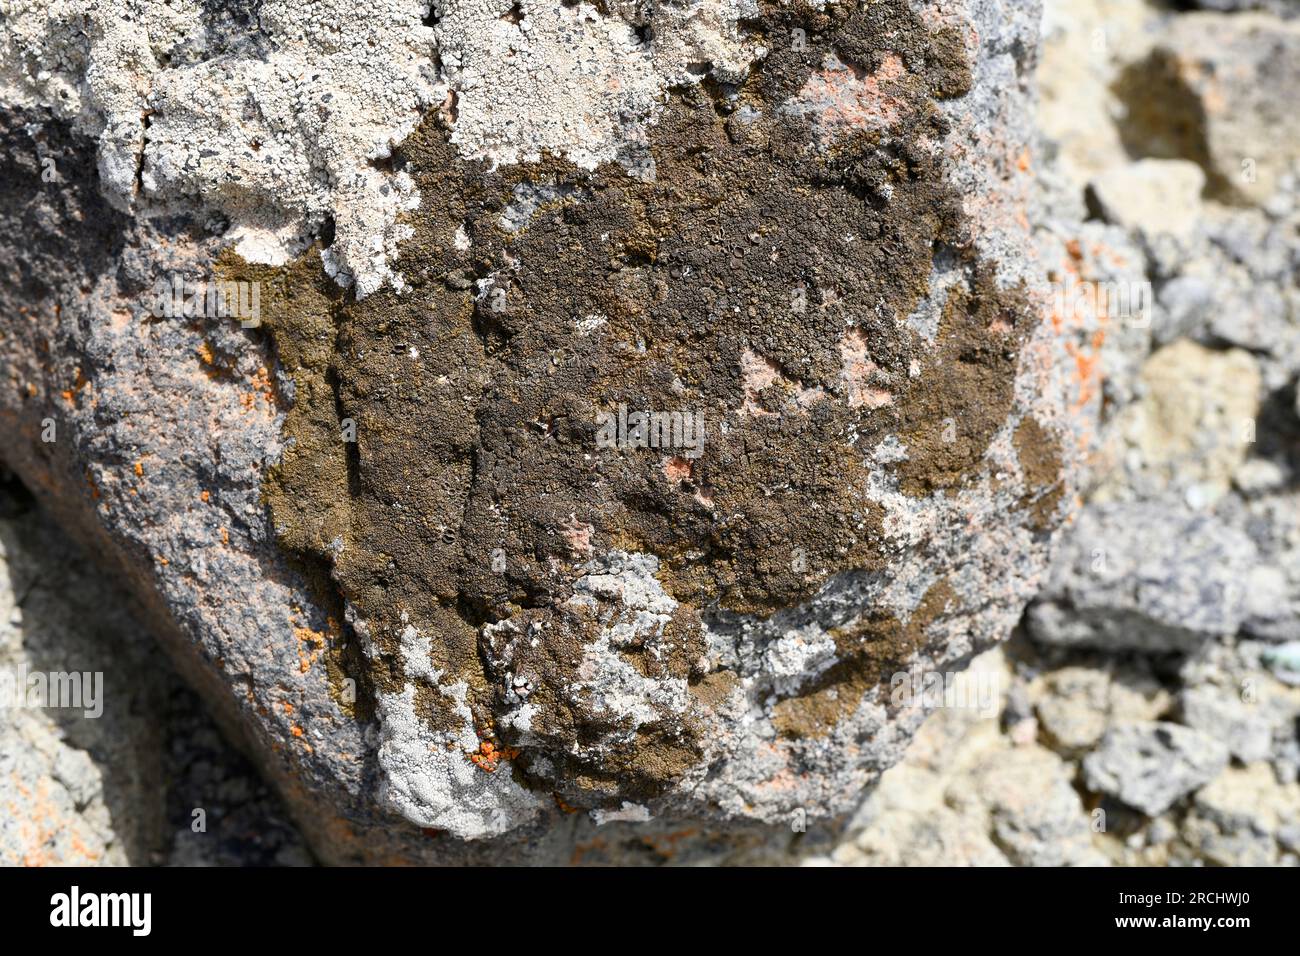 Parmelia pulla, Neofuscelia pulla or Xanthoparmelia pulla is a foliose lichen. Growing on andesite volcanic rock. This photo was taken in Cabo de Gata Stock Photo